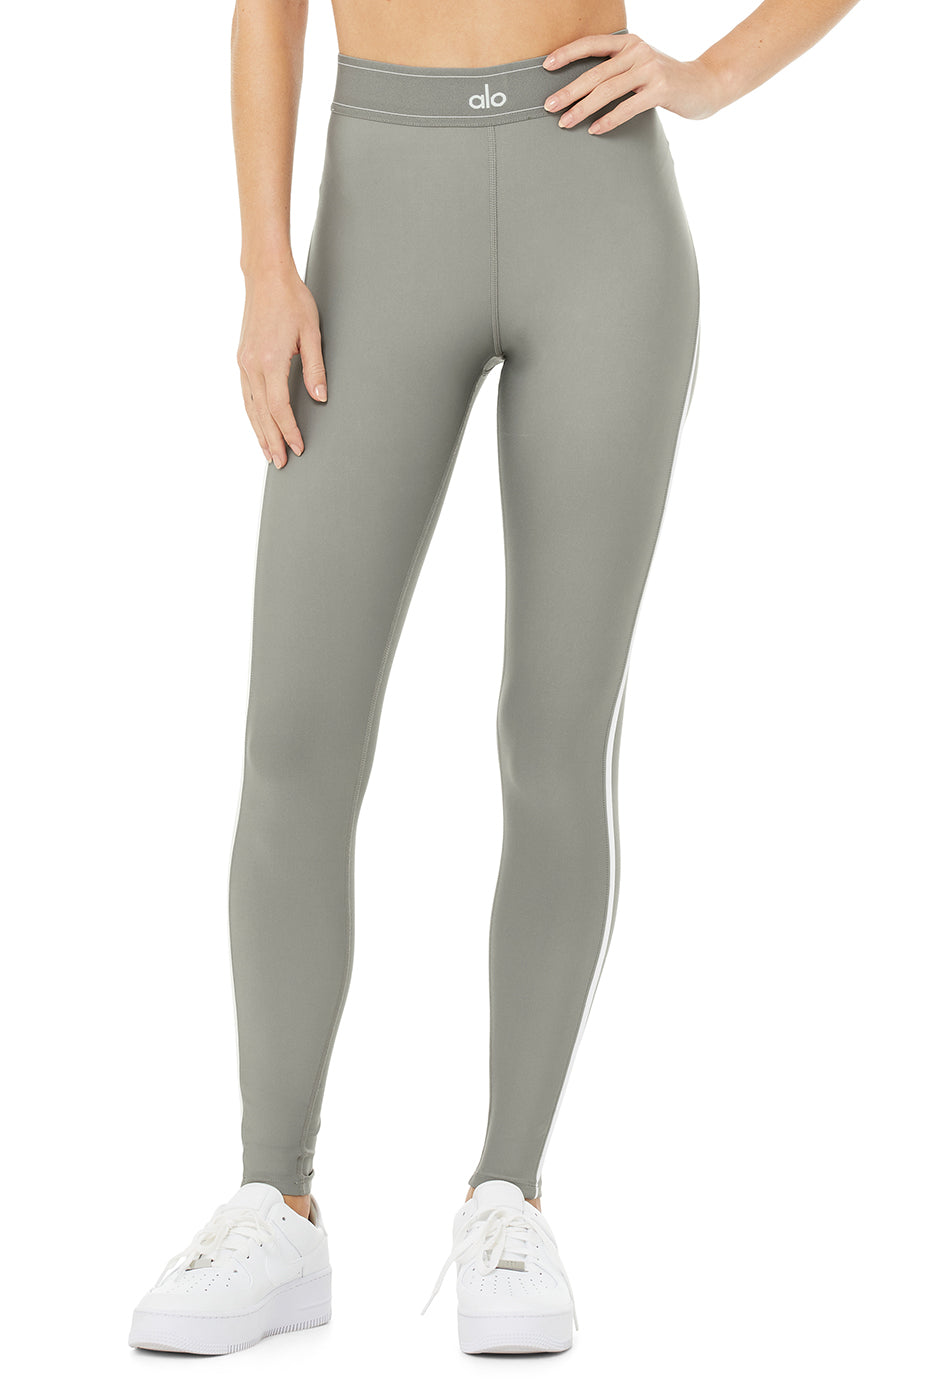 Airlift High-Waist Suit Up Legging in Sterling by Alo Yoga - Work Well Daily